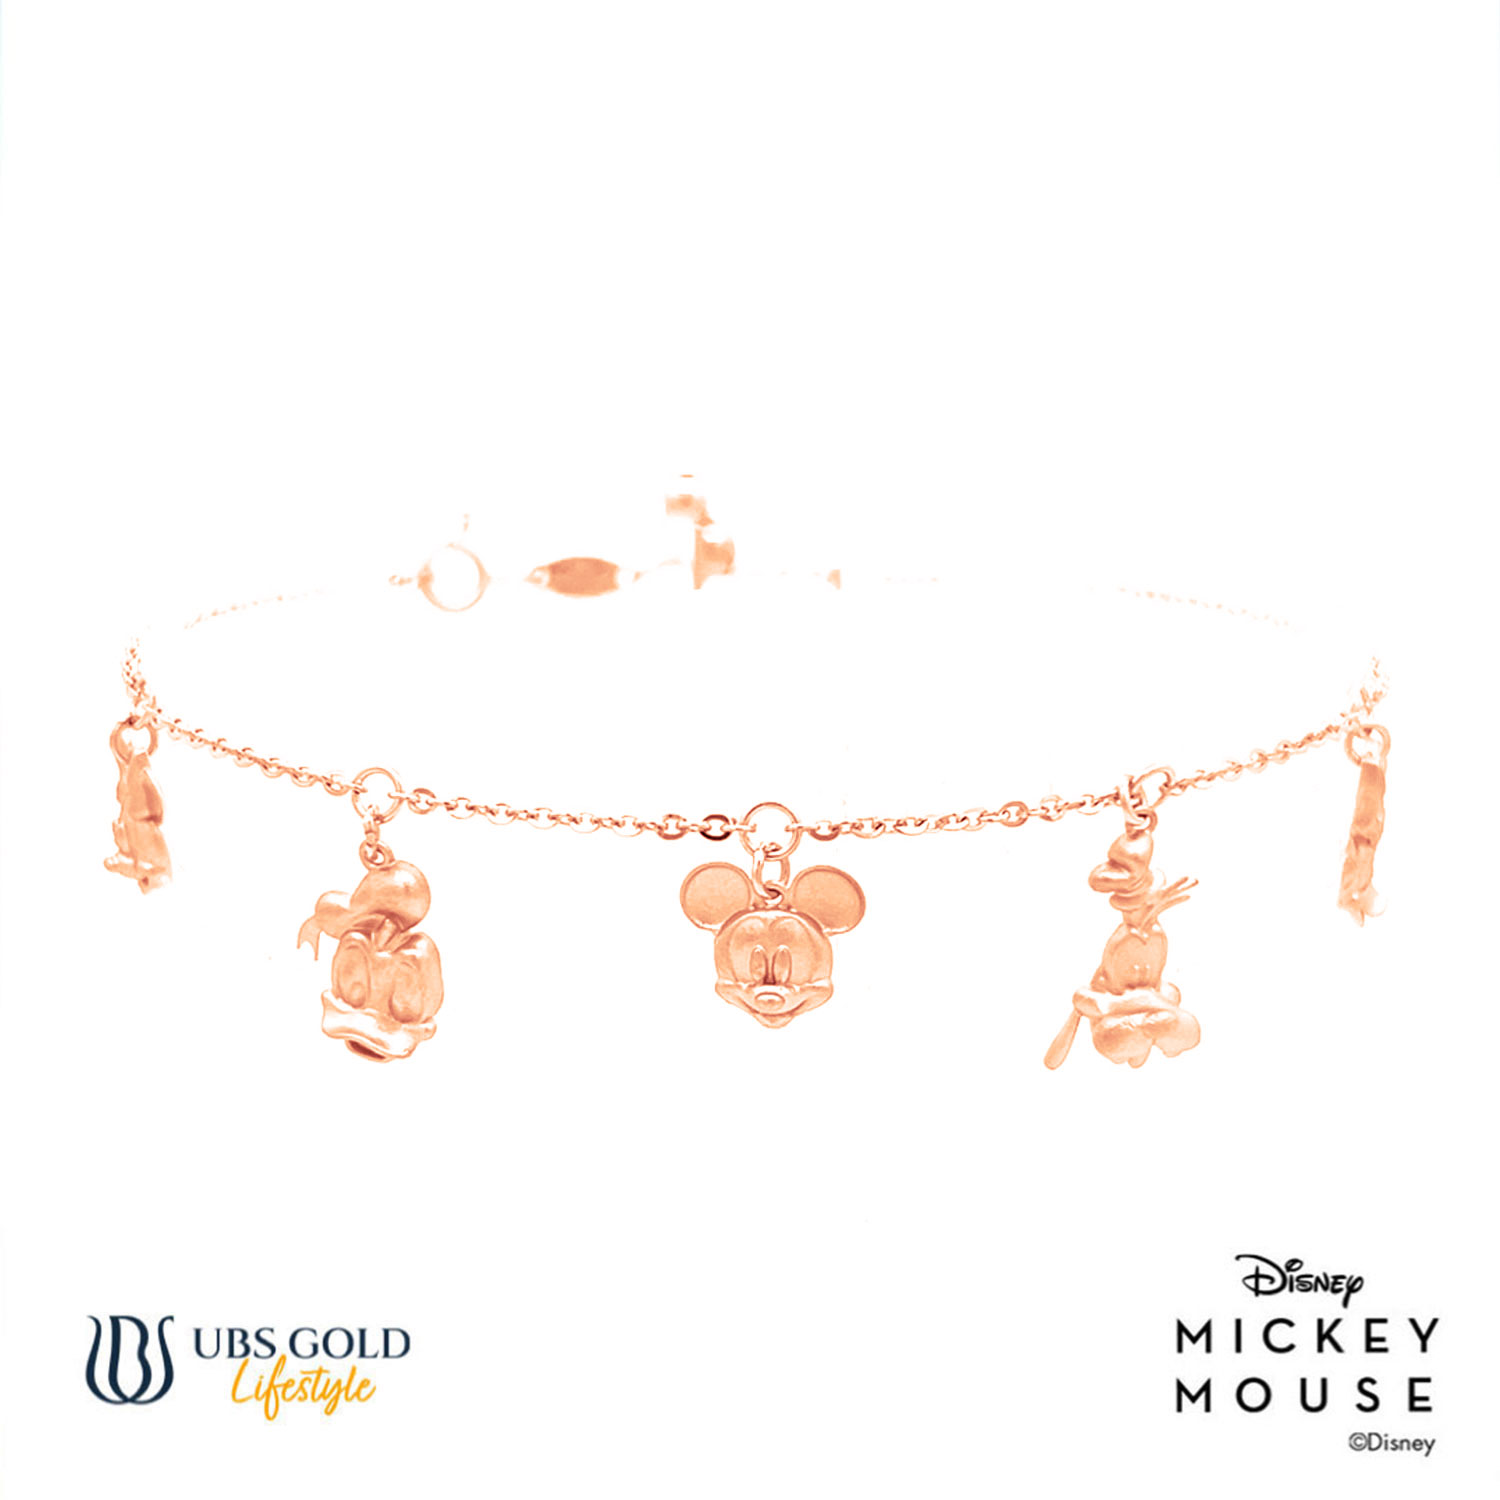 UBS Gold Gelang Emas Disney Mickey and Friends - Kgy0128 - 17K